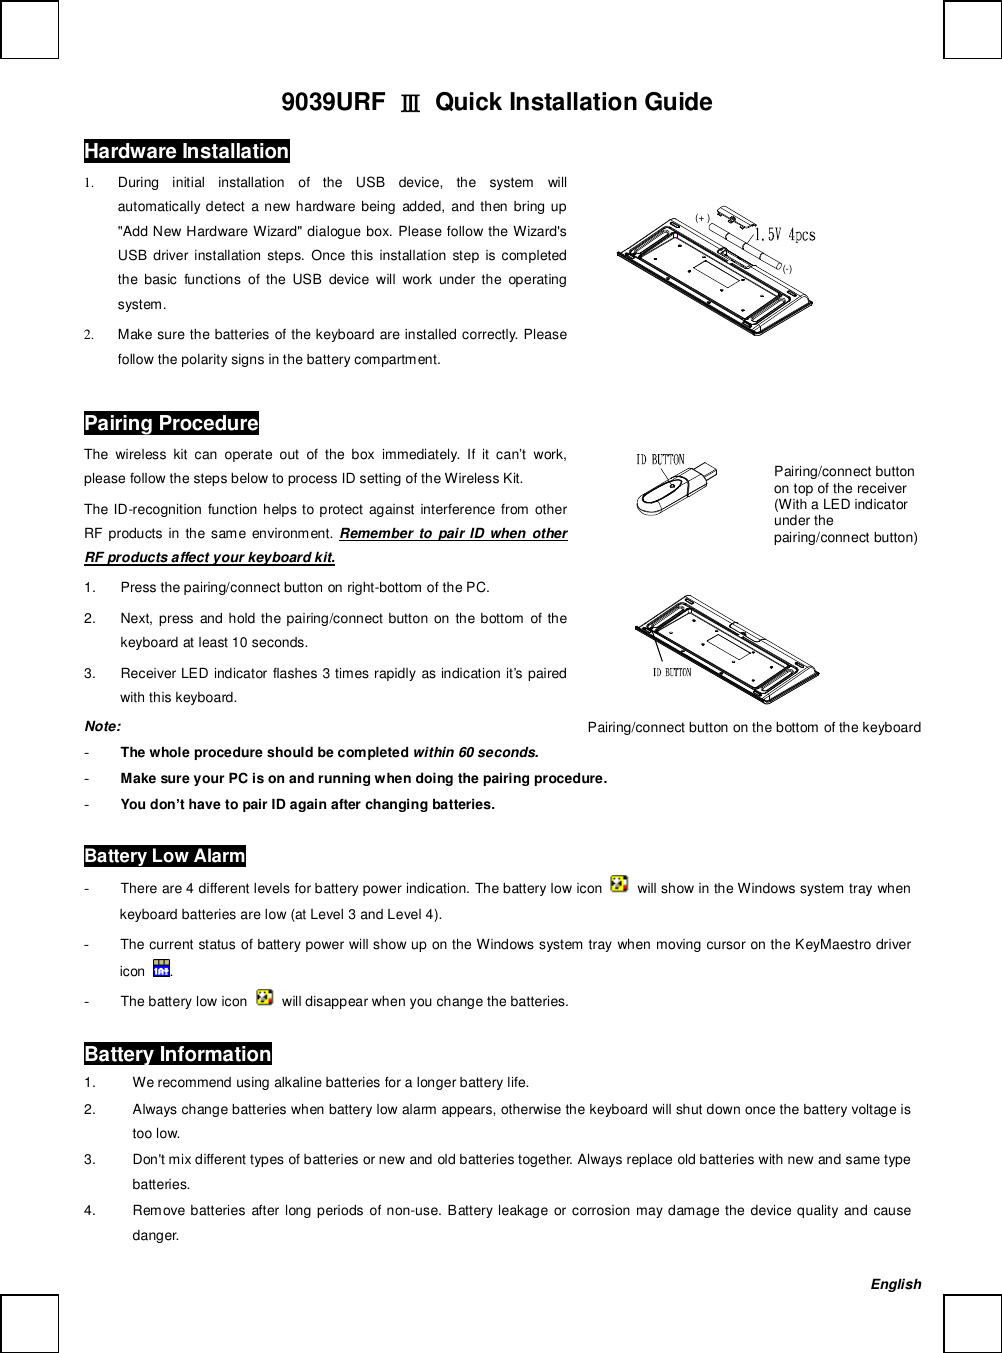   9039URF  Ⅲ Quick Installation Guide Hardware Installation                 (+)(-)       1. During initial installation of the USB device, the system will automatically detect a new hardware being added, and then bring up &quot;Add New Hardware Wizard&quot; dialogue box. Please follow the Wizard&apos;s USB driver installation steps. Once this installation step is completed the basic functions of the USB device will work under the operating system. 2. Make sure the batteries of the keyboard are installed correctly. Please follow the polarity signs in the battery compartment. Pairing Procedure The wireless kit can operate out of the box immediately. If it can’t work, please follow the steps below to process ID setting of the Wireless Kit. The ID-recognition function helps to protect against interference from other RF products in the same environment.  Remember to pair ID when other RF products affect your keyboard kit. 1.  Press the pairing/connect button on right-bottom of the PC.  2.  Next, press and hold the pairing/connect button on the bottom of the keyboard at least 10 seconds.  3.  Receiver LED indicator flashes 3 times rapidly as indication it’s paired with this keyboard.               Note:  - The whole procedure should be completed within 60 seconds. - Make sure your PC is on and running when doing the pairing procedure. - You don’t have to pair ID again after changing batteries. Battery Low Alarm - There are 4 different levels for battery power indication. The battery low icon   will show in the Windows system tray when keyboard batteries are low (at Level 3 and Level 4). - The current status of battery power will show up on the Windows system tray when moving cursor on the KeyMaestro driver icon  . - The battery low icon   will disappear when you change the batteries. Battery Information 1.  We recommend using alkaline batteries for a longer battery life. 2.  Always change batteries when battery low alarm appears, otherwise the keyboard will shut down once the battery voltage is too low. 3.  Don&apos;t mix different types of batteries or new and old batteries together. Always replace old batteries with new and same type batteries. 4.  Remove batteries after long periods of non-use. Battery leakage or corrosion may damage the device quality and cause danger.   Pairing/connect button on the bottom of the keyboard  English Pairing/connect button on top of the receiver (With a LED indicator under the pairing/connect button) 